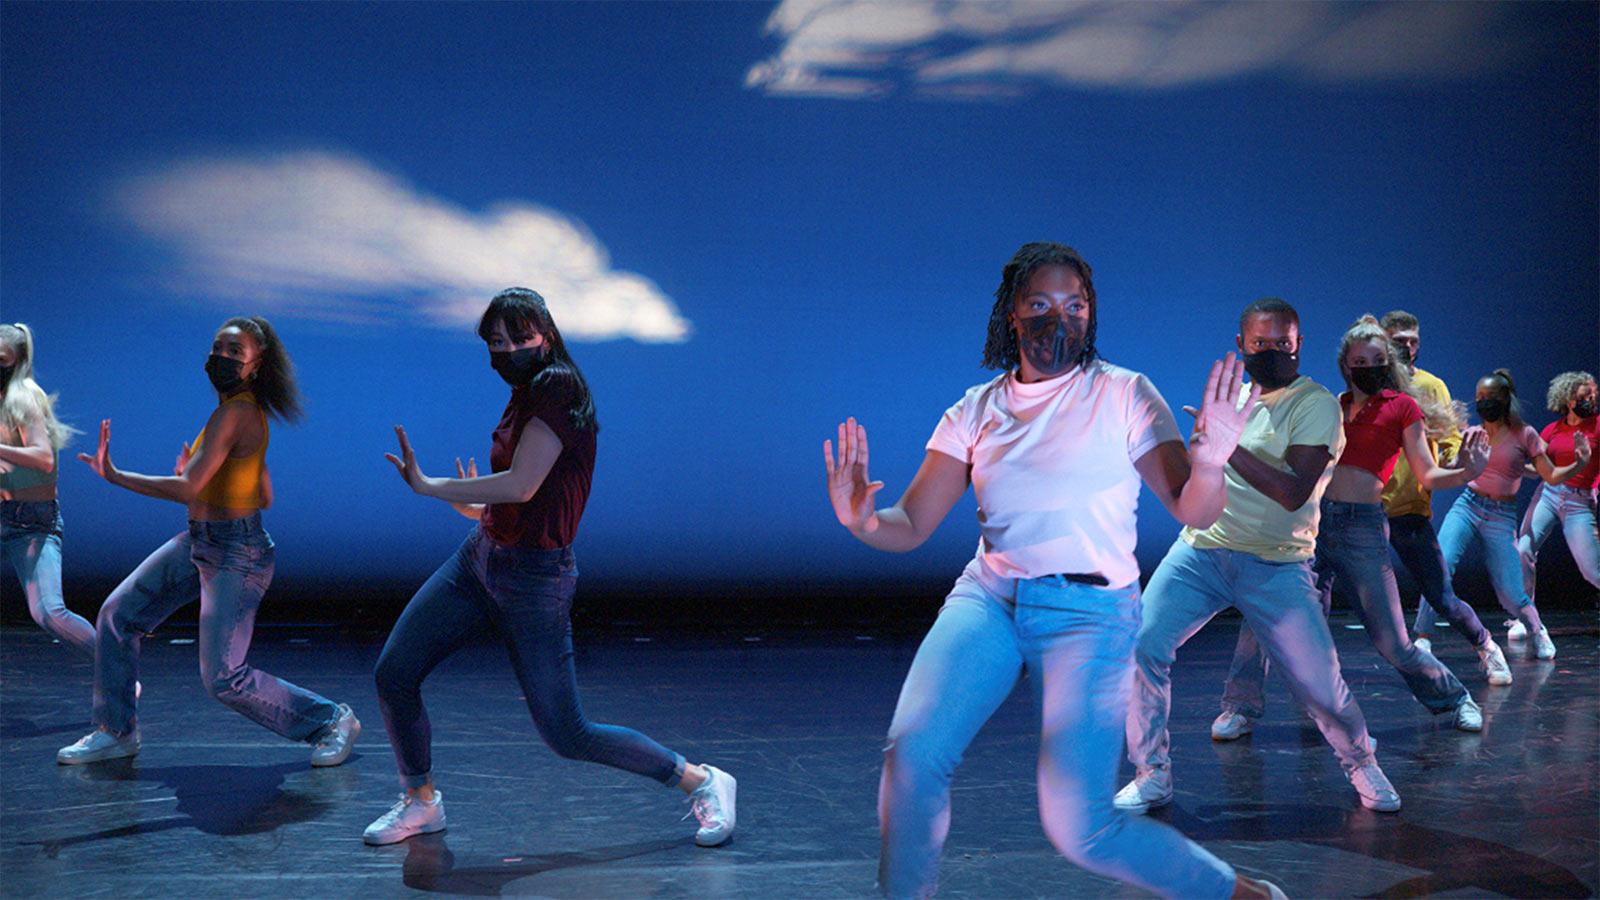 Sands College of Performing Arts students dancing on stage in masks